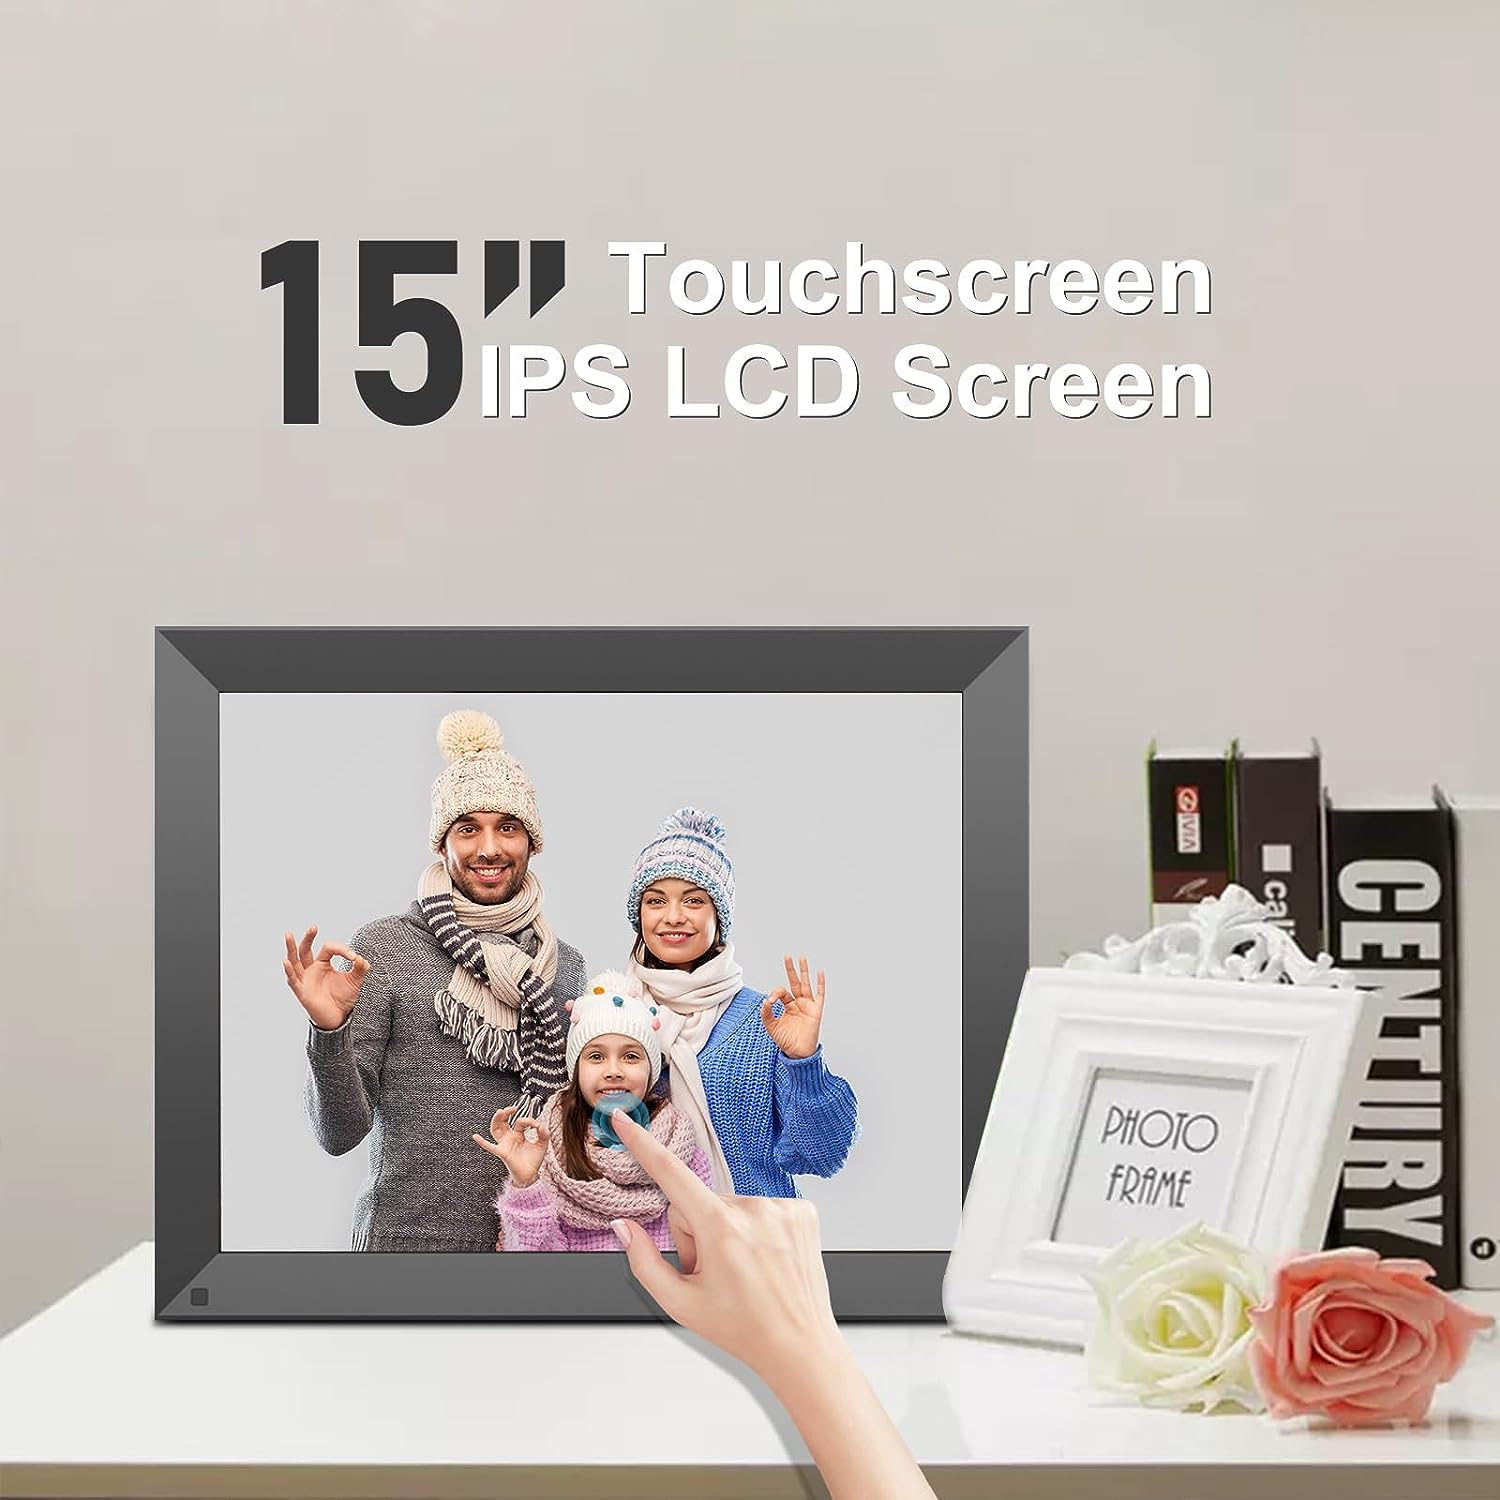 FULLJA 10 inch WIFI Digital Picture Frame Touch Screen IPS HD Display, Smart Digital Photo Frame, 16GB Storage, Auto-Rotate, Motion Sensor, Share Photos and Videos via iOS or Android App, Email, Cloud